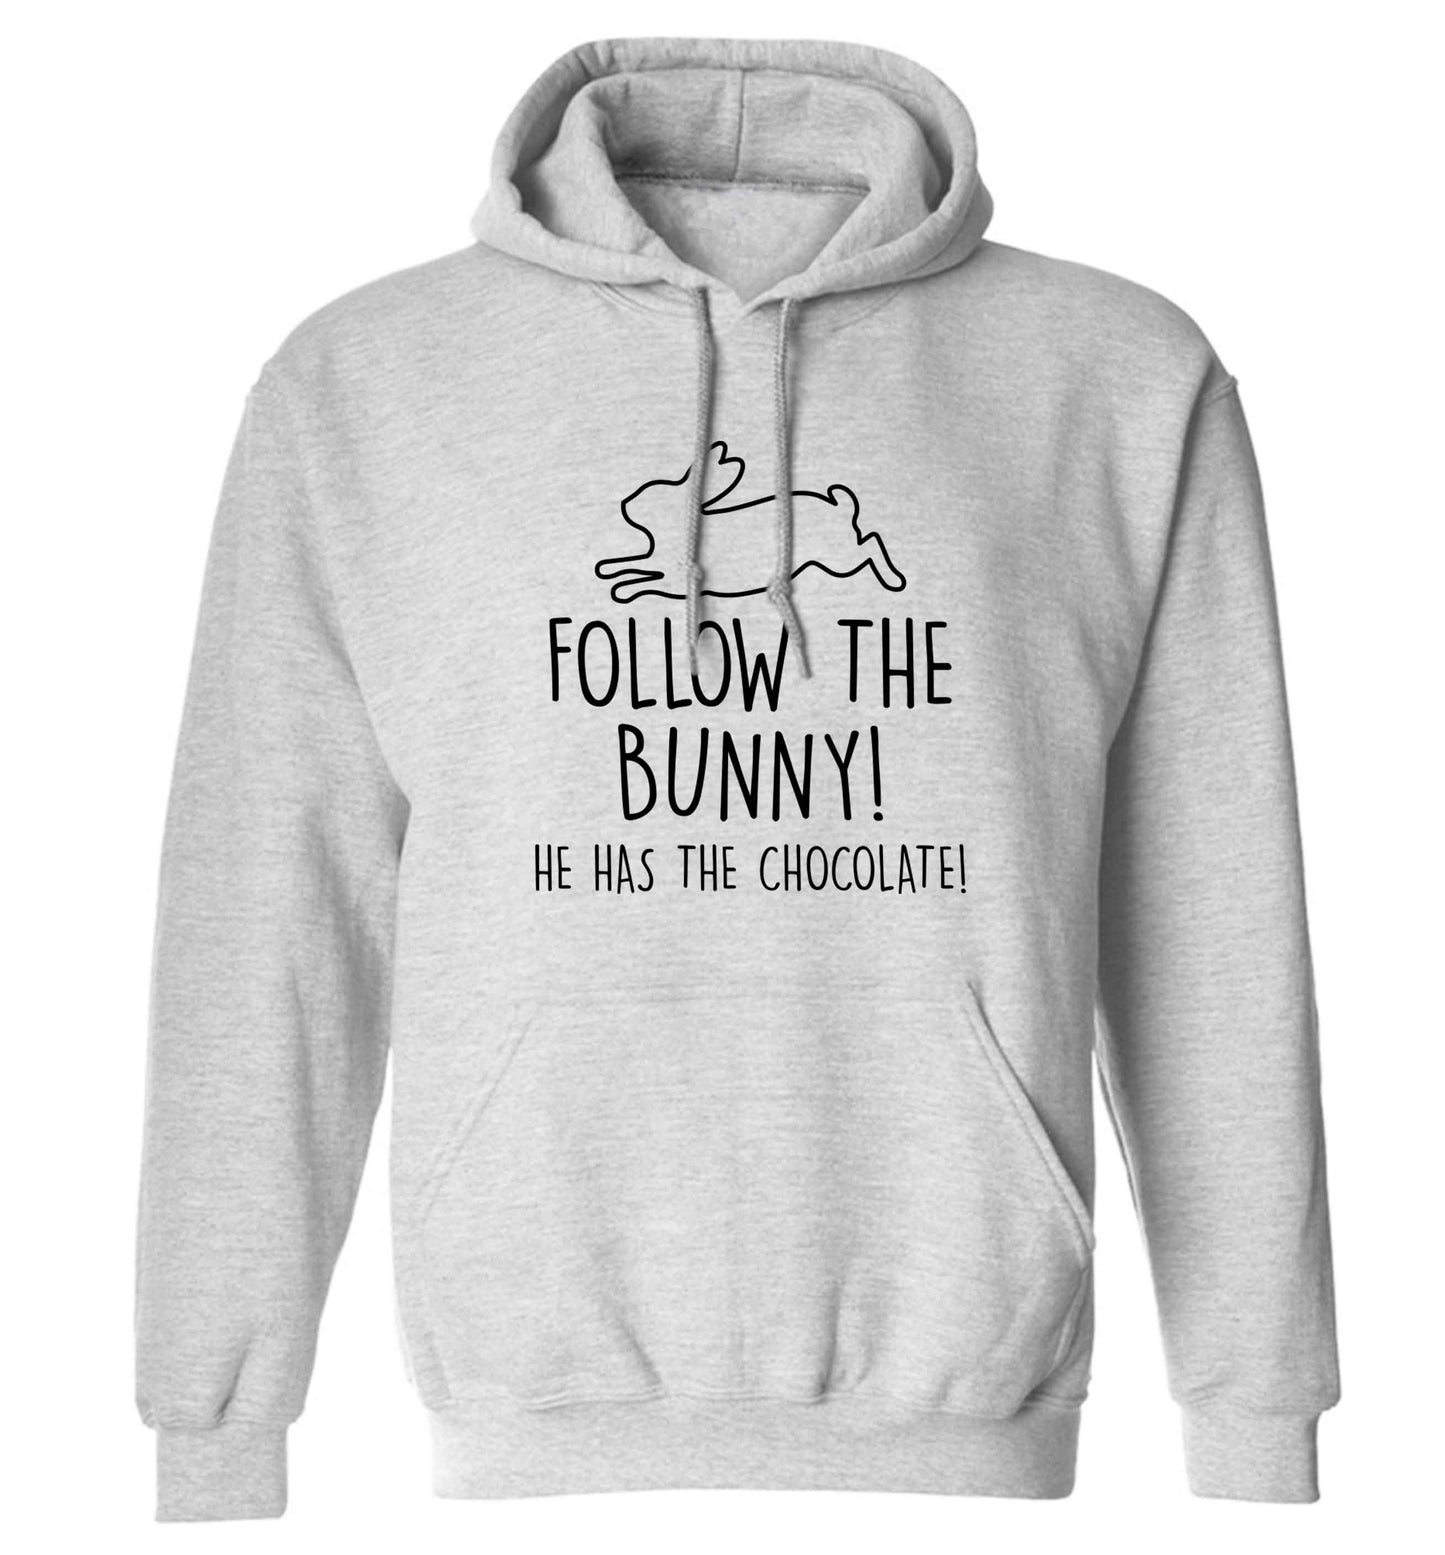 Follow the bunny! He has the chocolate adults unisex grey hoodie 2XL